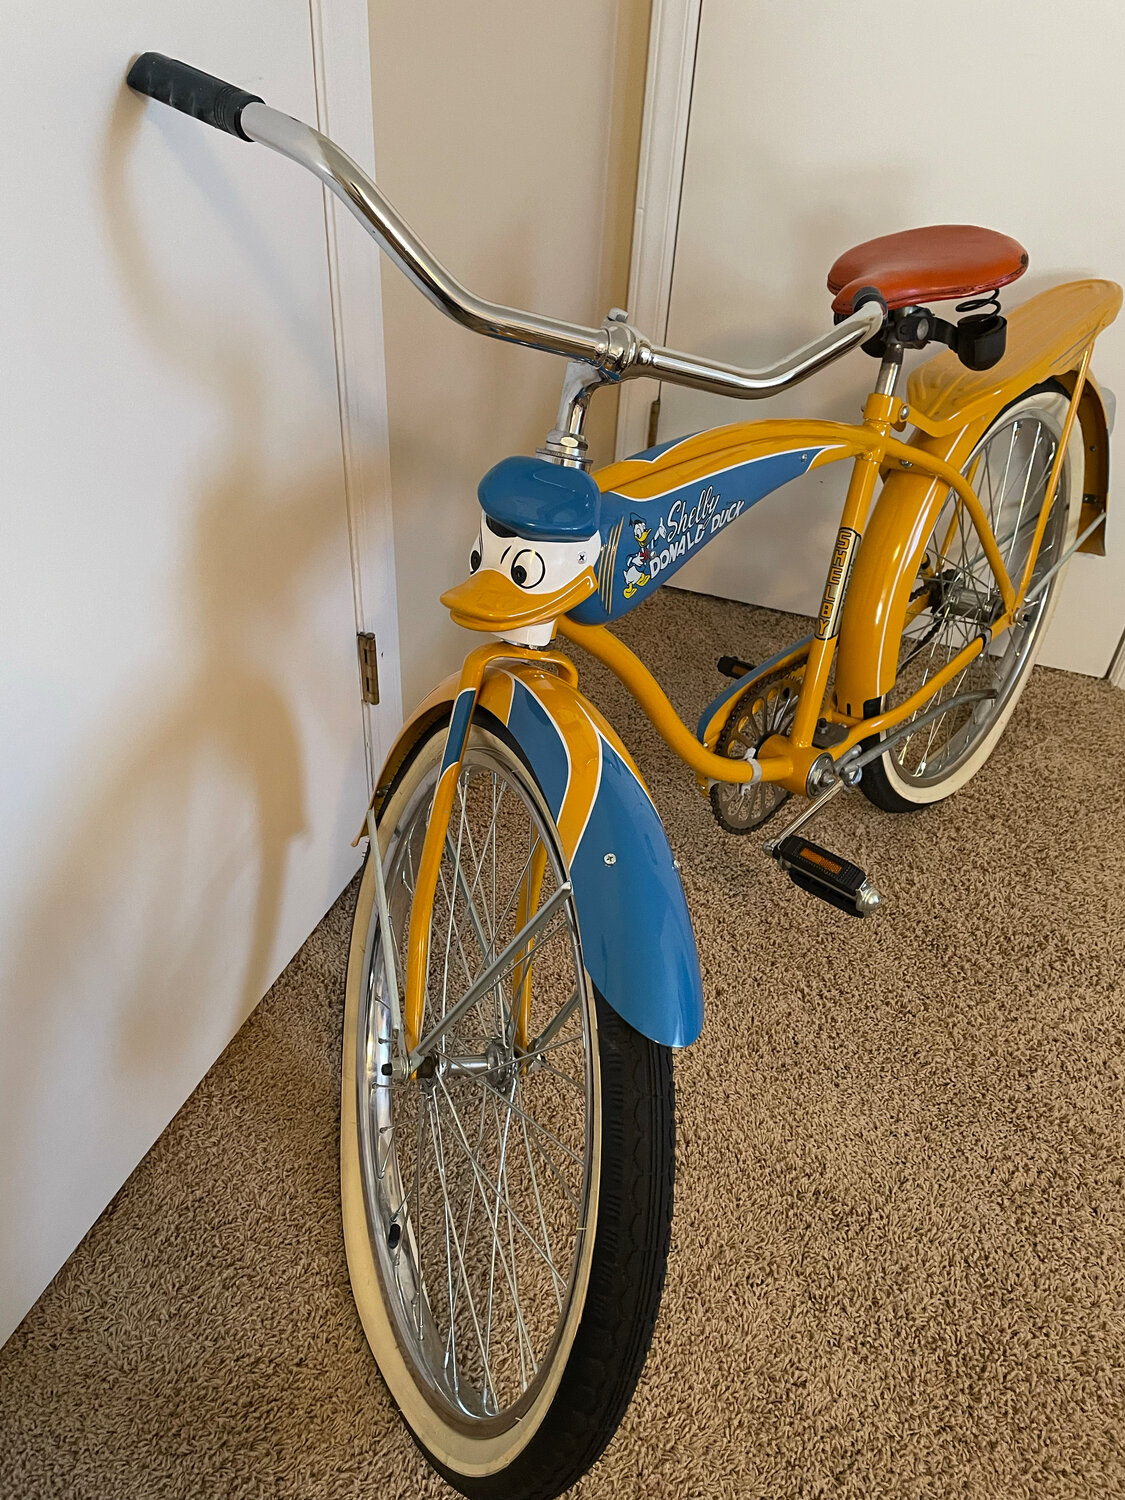 Donald Duck bicycle